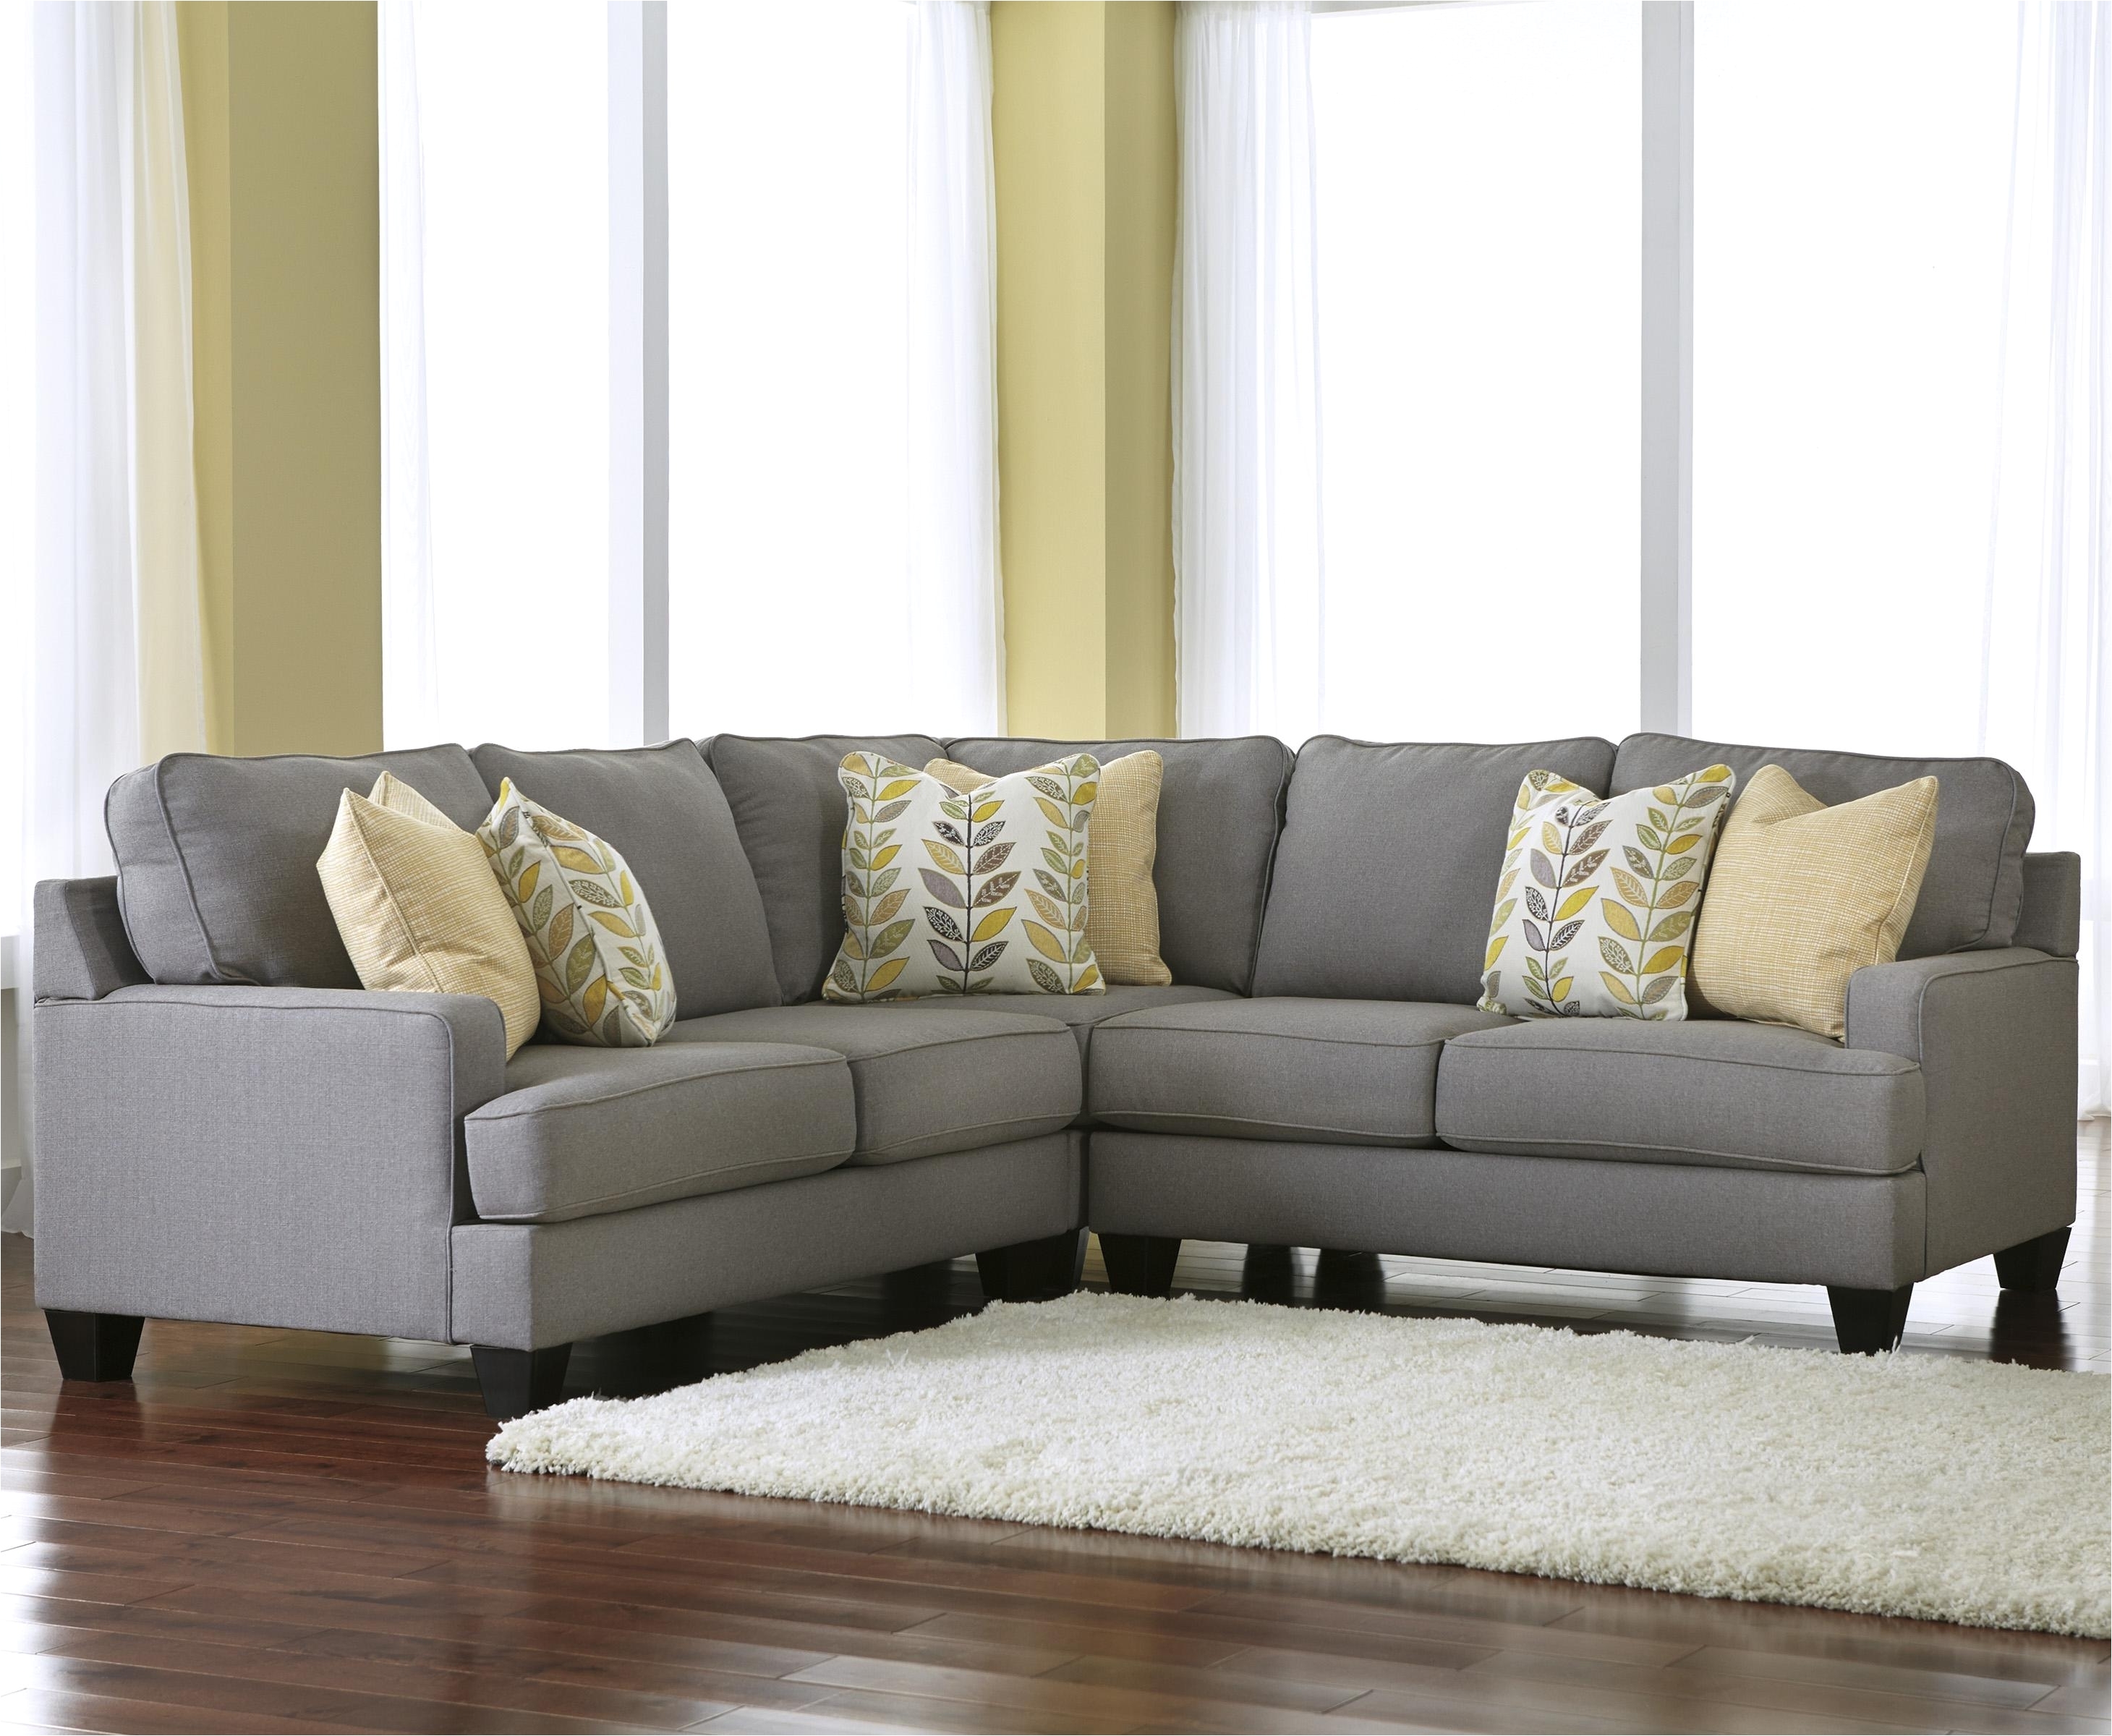 featured photo of sectional sofas at birmingham al